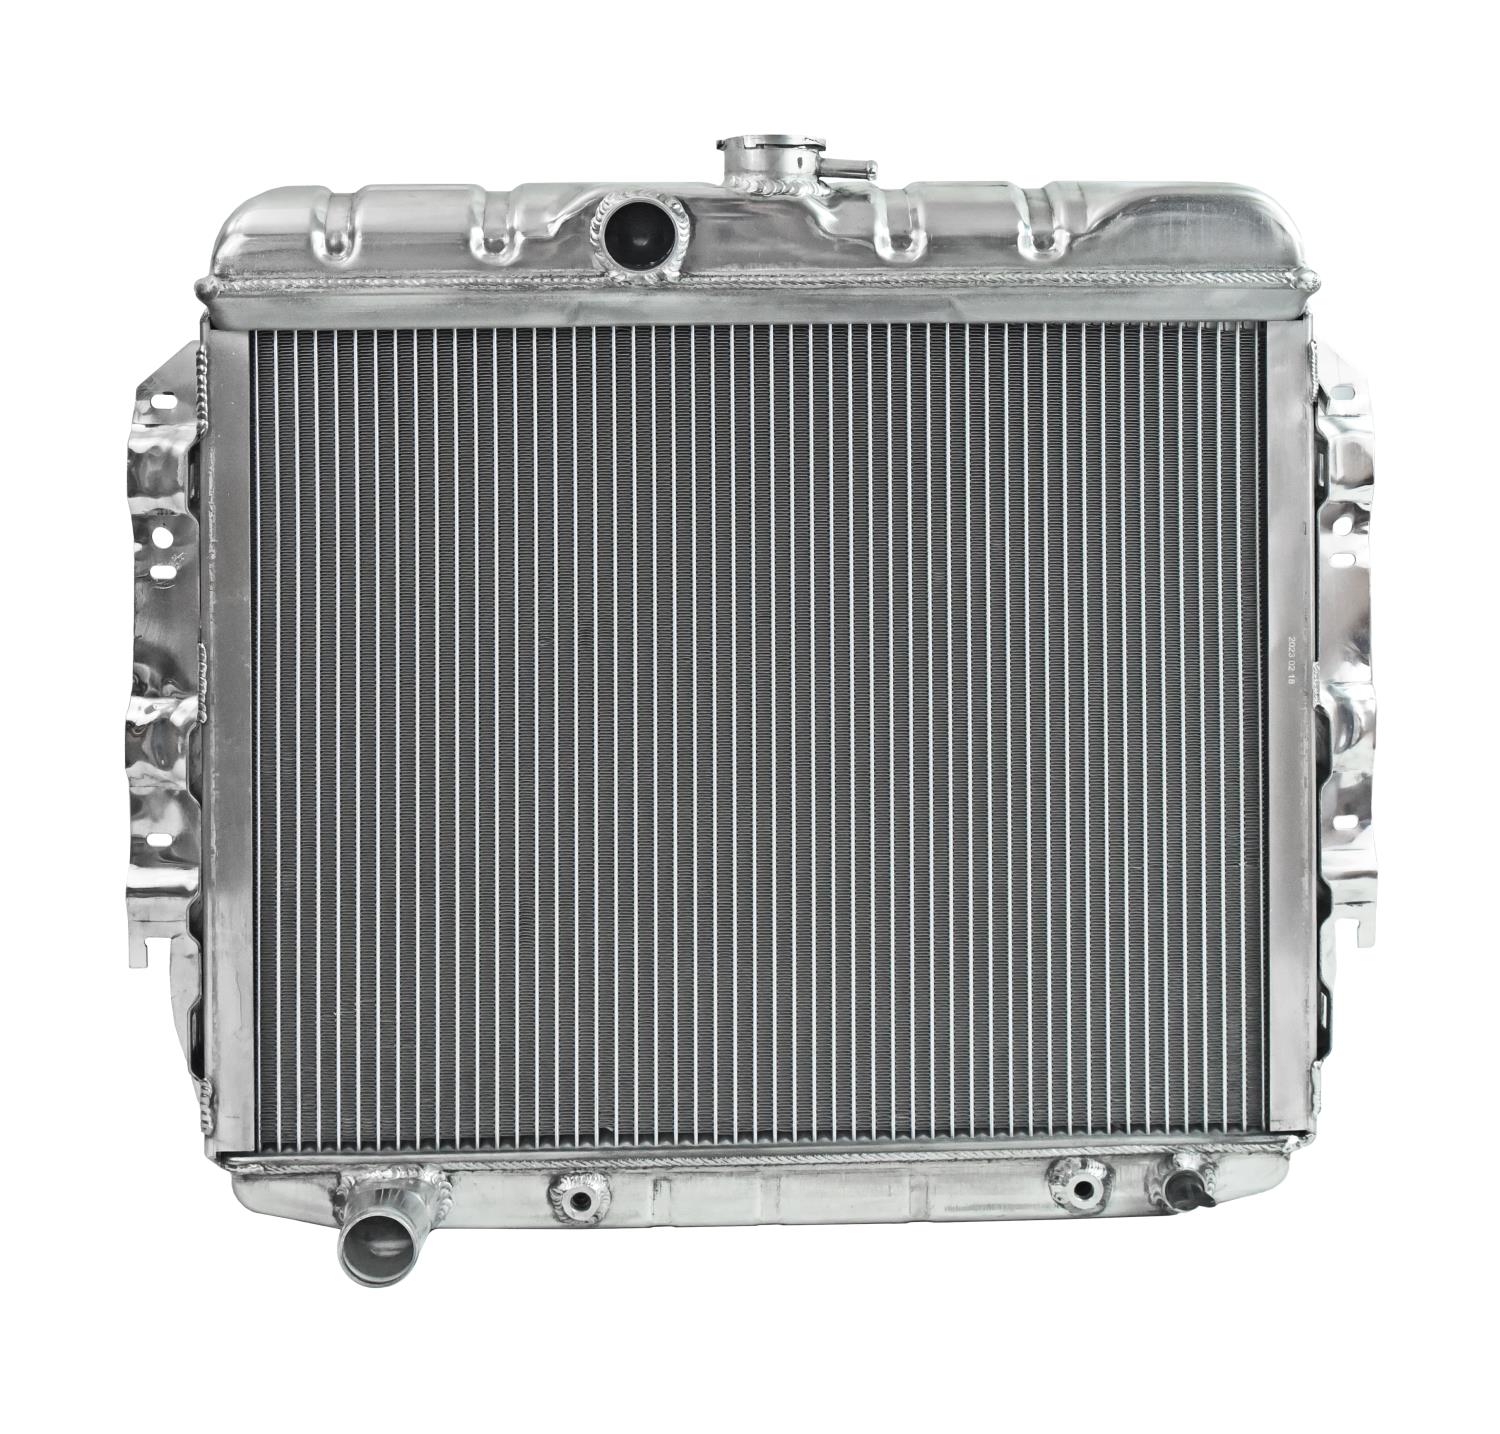 Reproduction Aluminum Radiator for Select 1965-1966 Mopar A Bodies With Big Block Engines